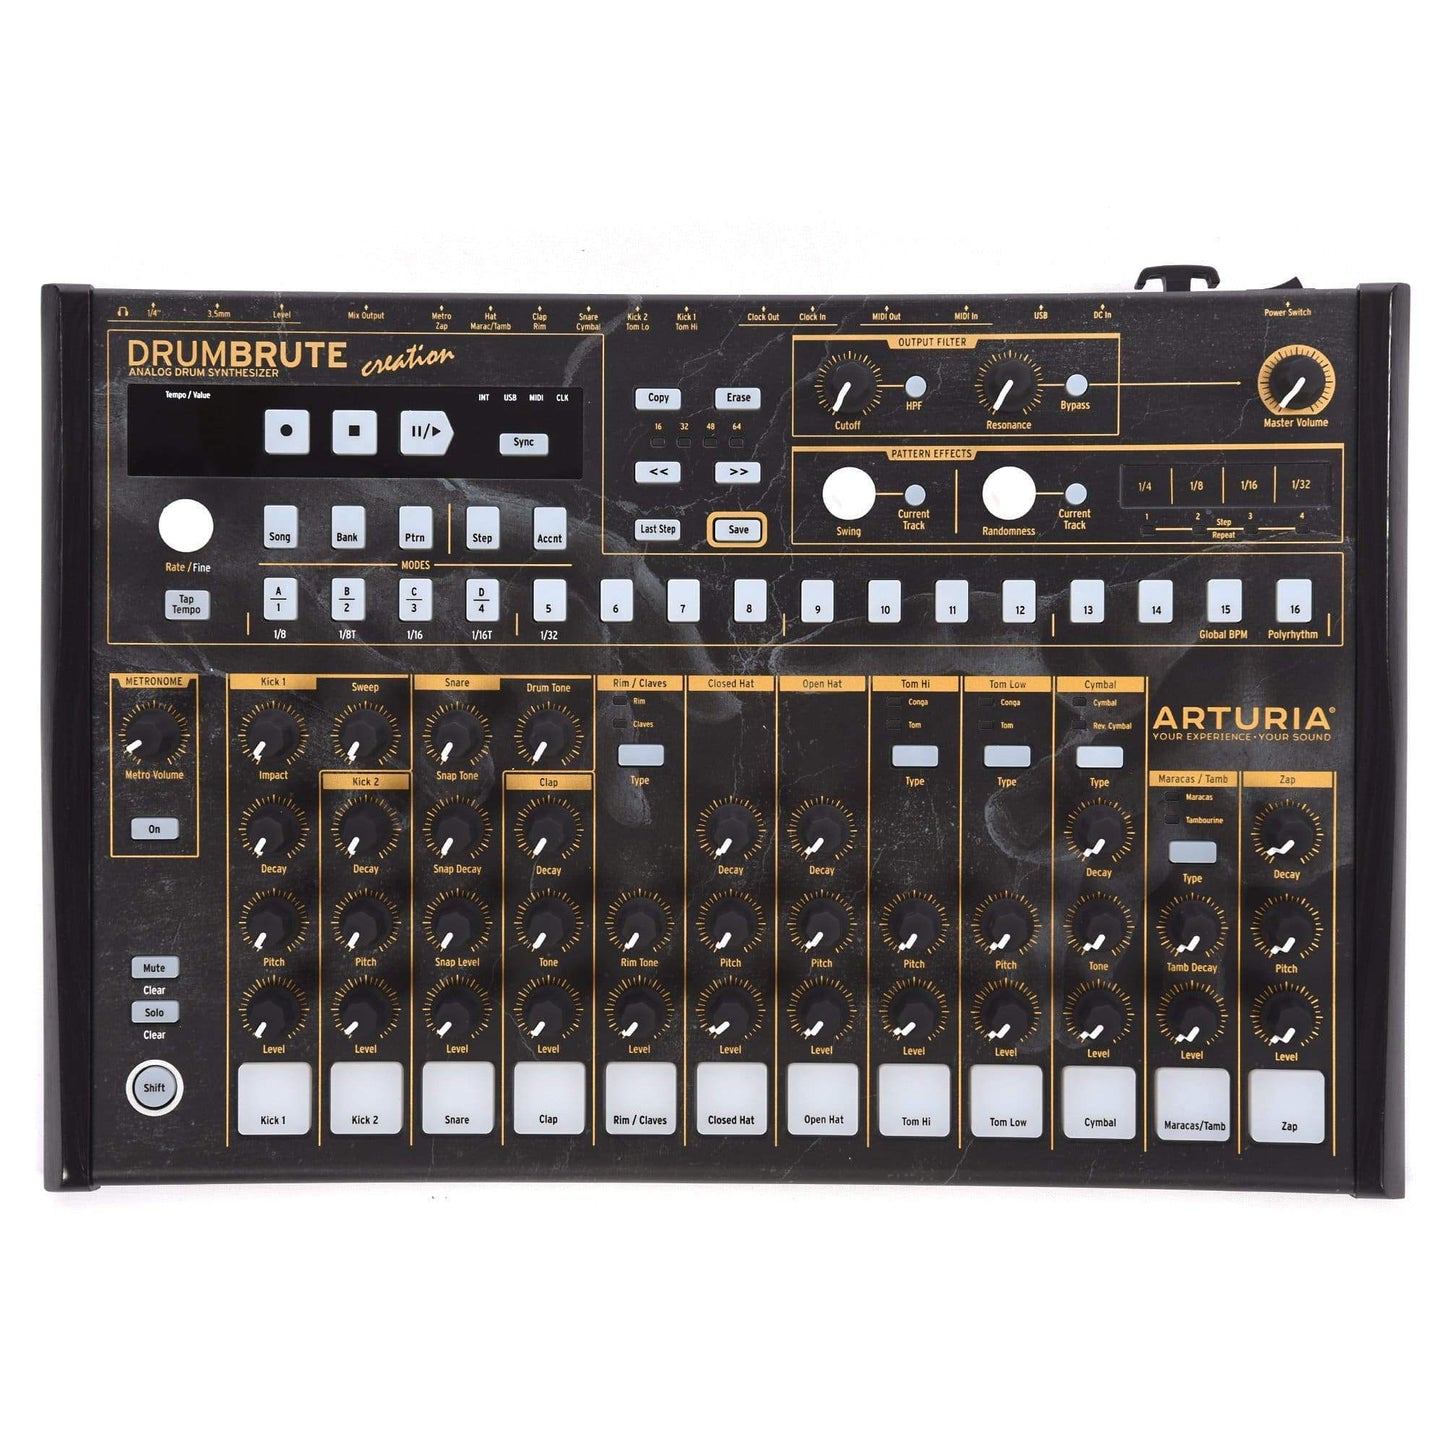 Arturia Creation Series DrumBrute Drums and Percussion / Drum Machines and Samplers